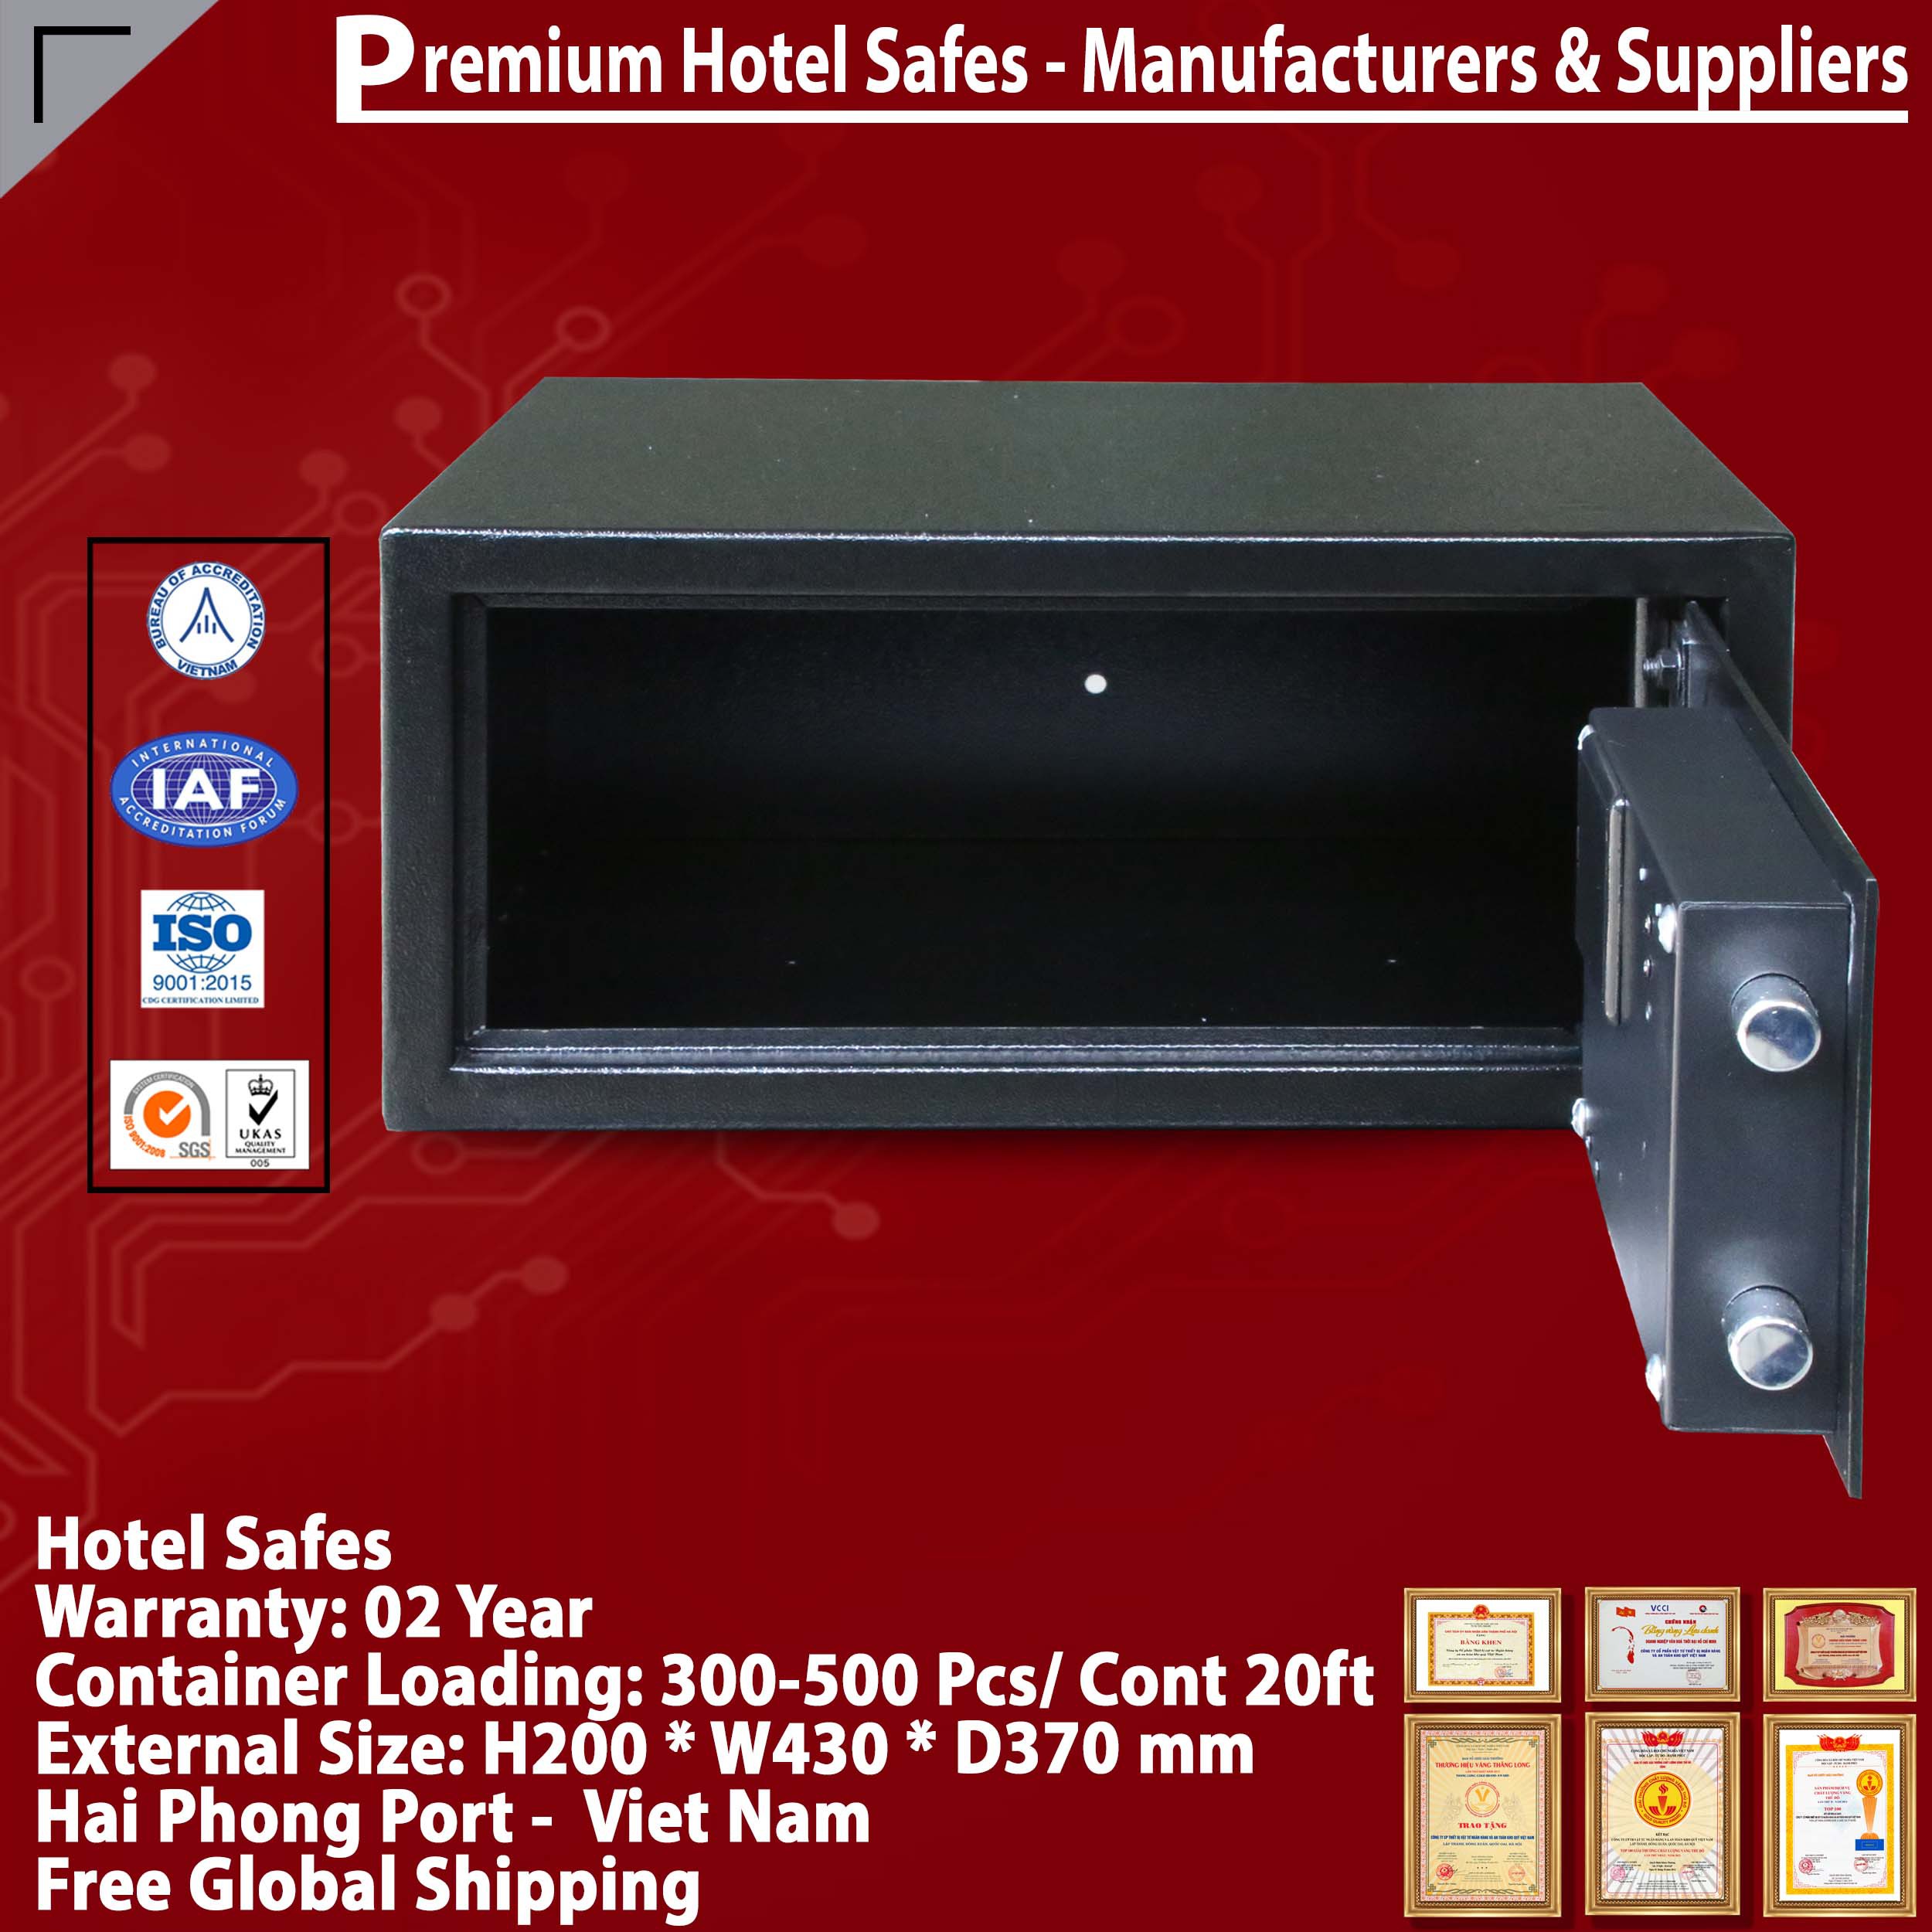 Best Sellers In Hotel Safes Made In Viet Nam For Sale